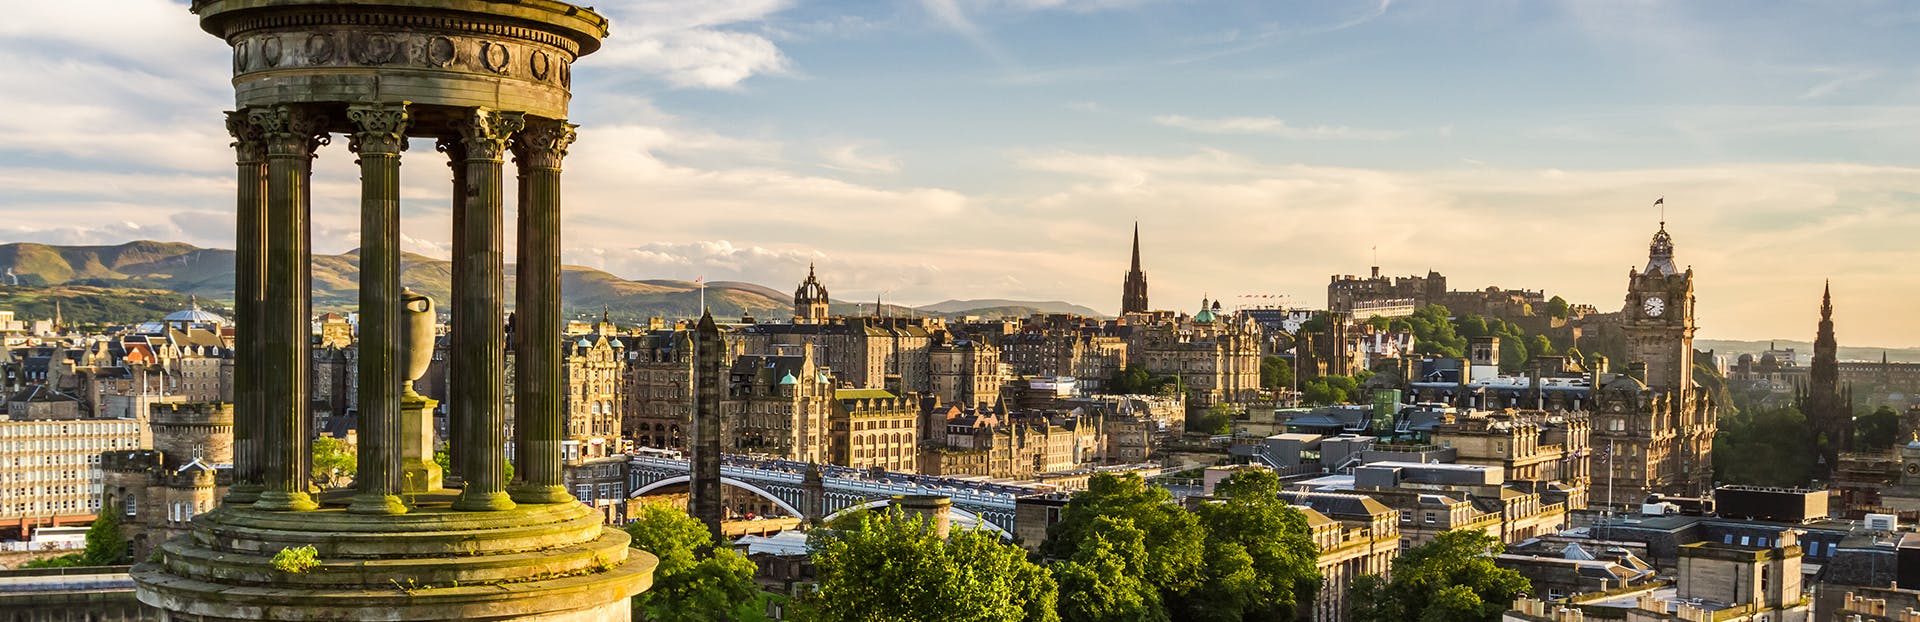 Discover Edinburgh's New Town on a self guided audio tour Musement